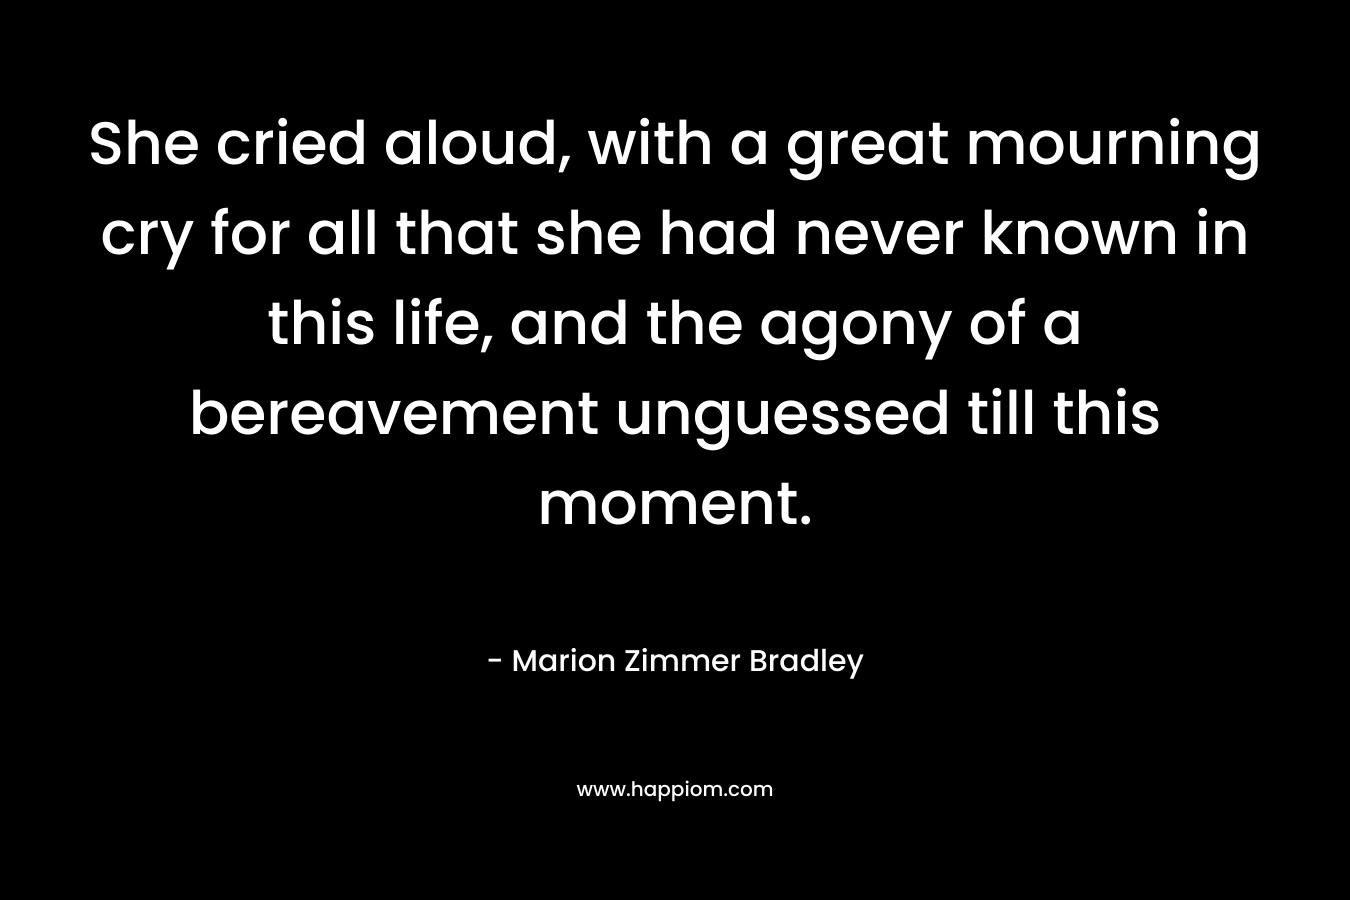 She cried aloud, with a great mourning cry for all that she had never known in this life, and the agony of a bereavement unguessed till this moment. – Marion Zimmer Bradley